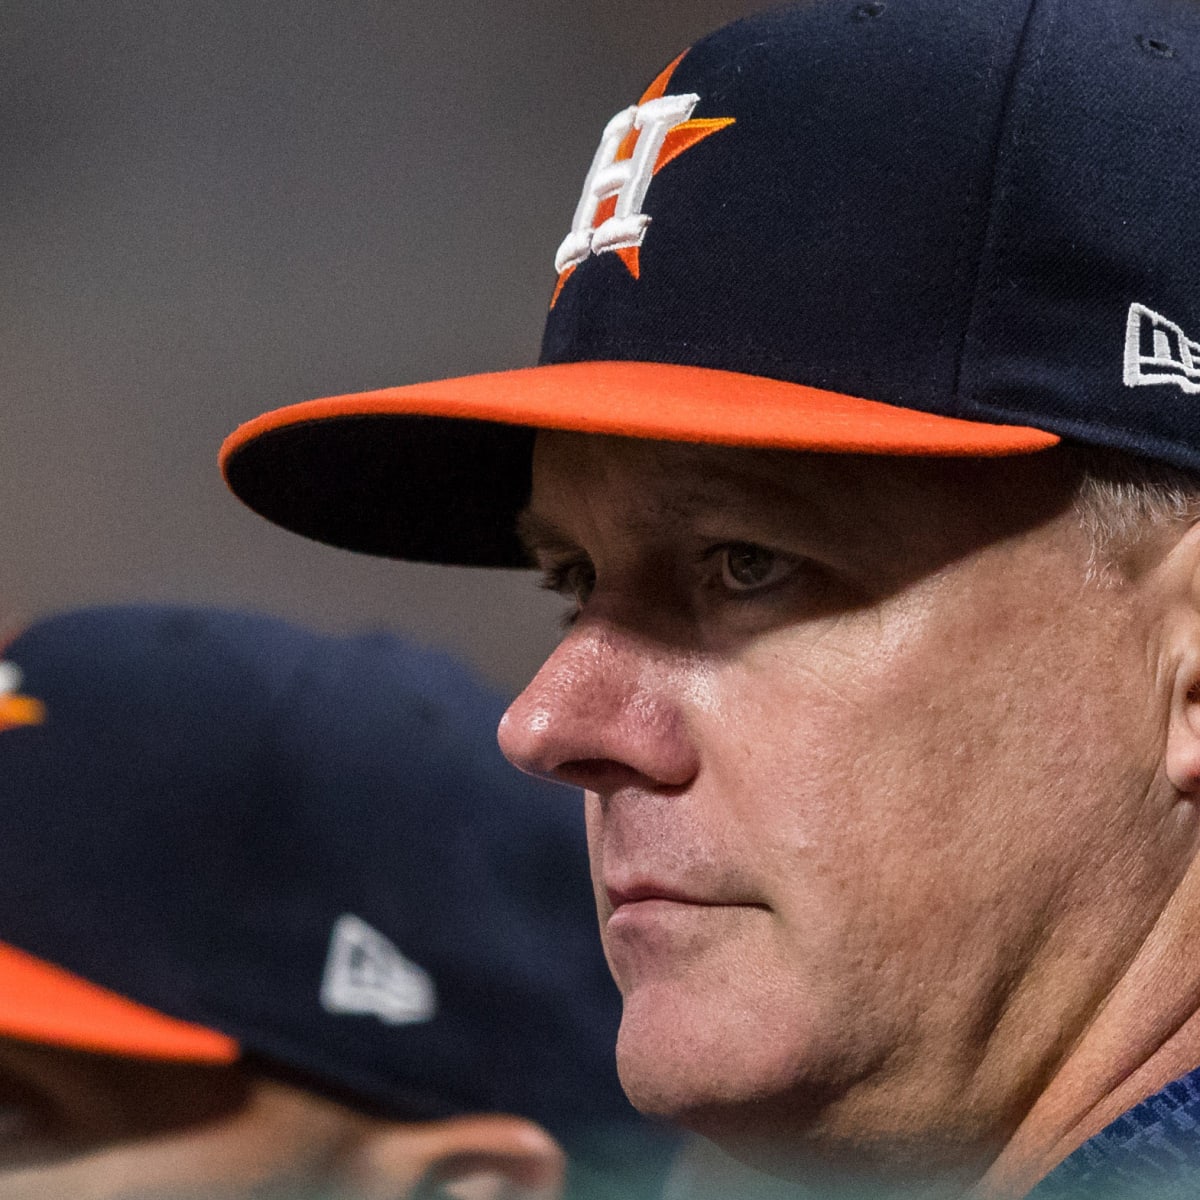 Former Astros manager AJ Hinch hired by Detroit Tigers following MLB  suspension - ABC13 Houston